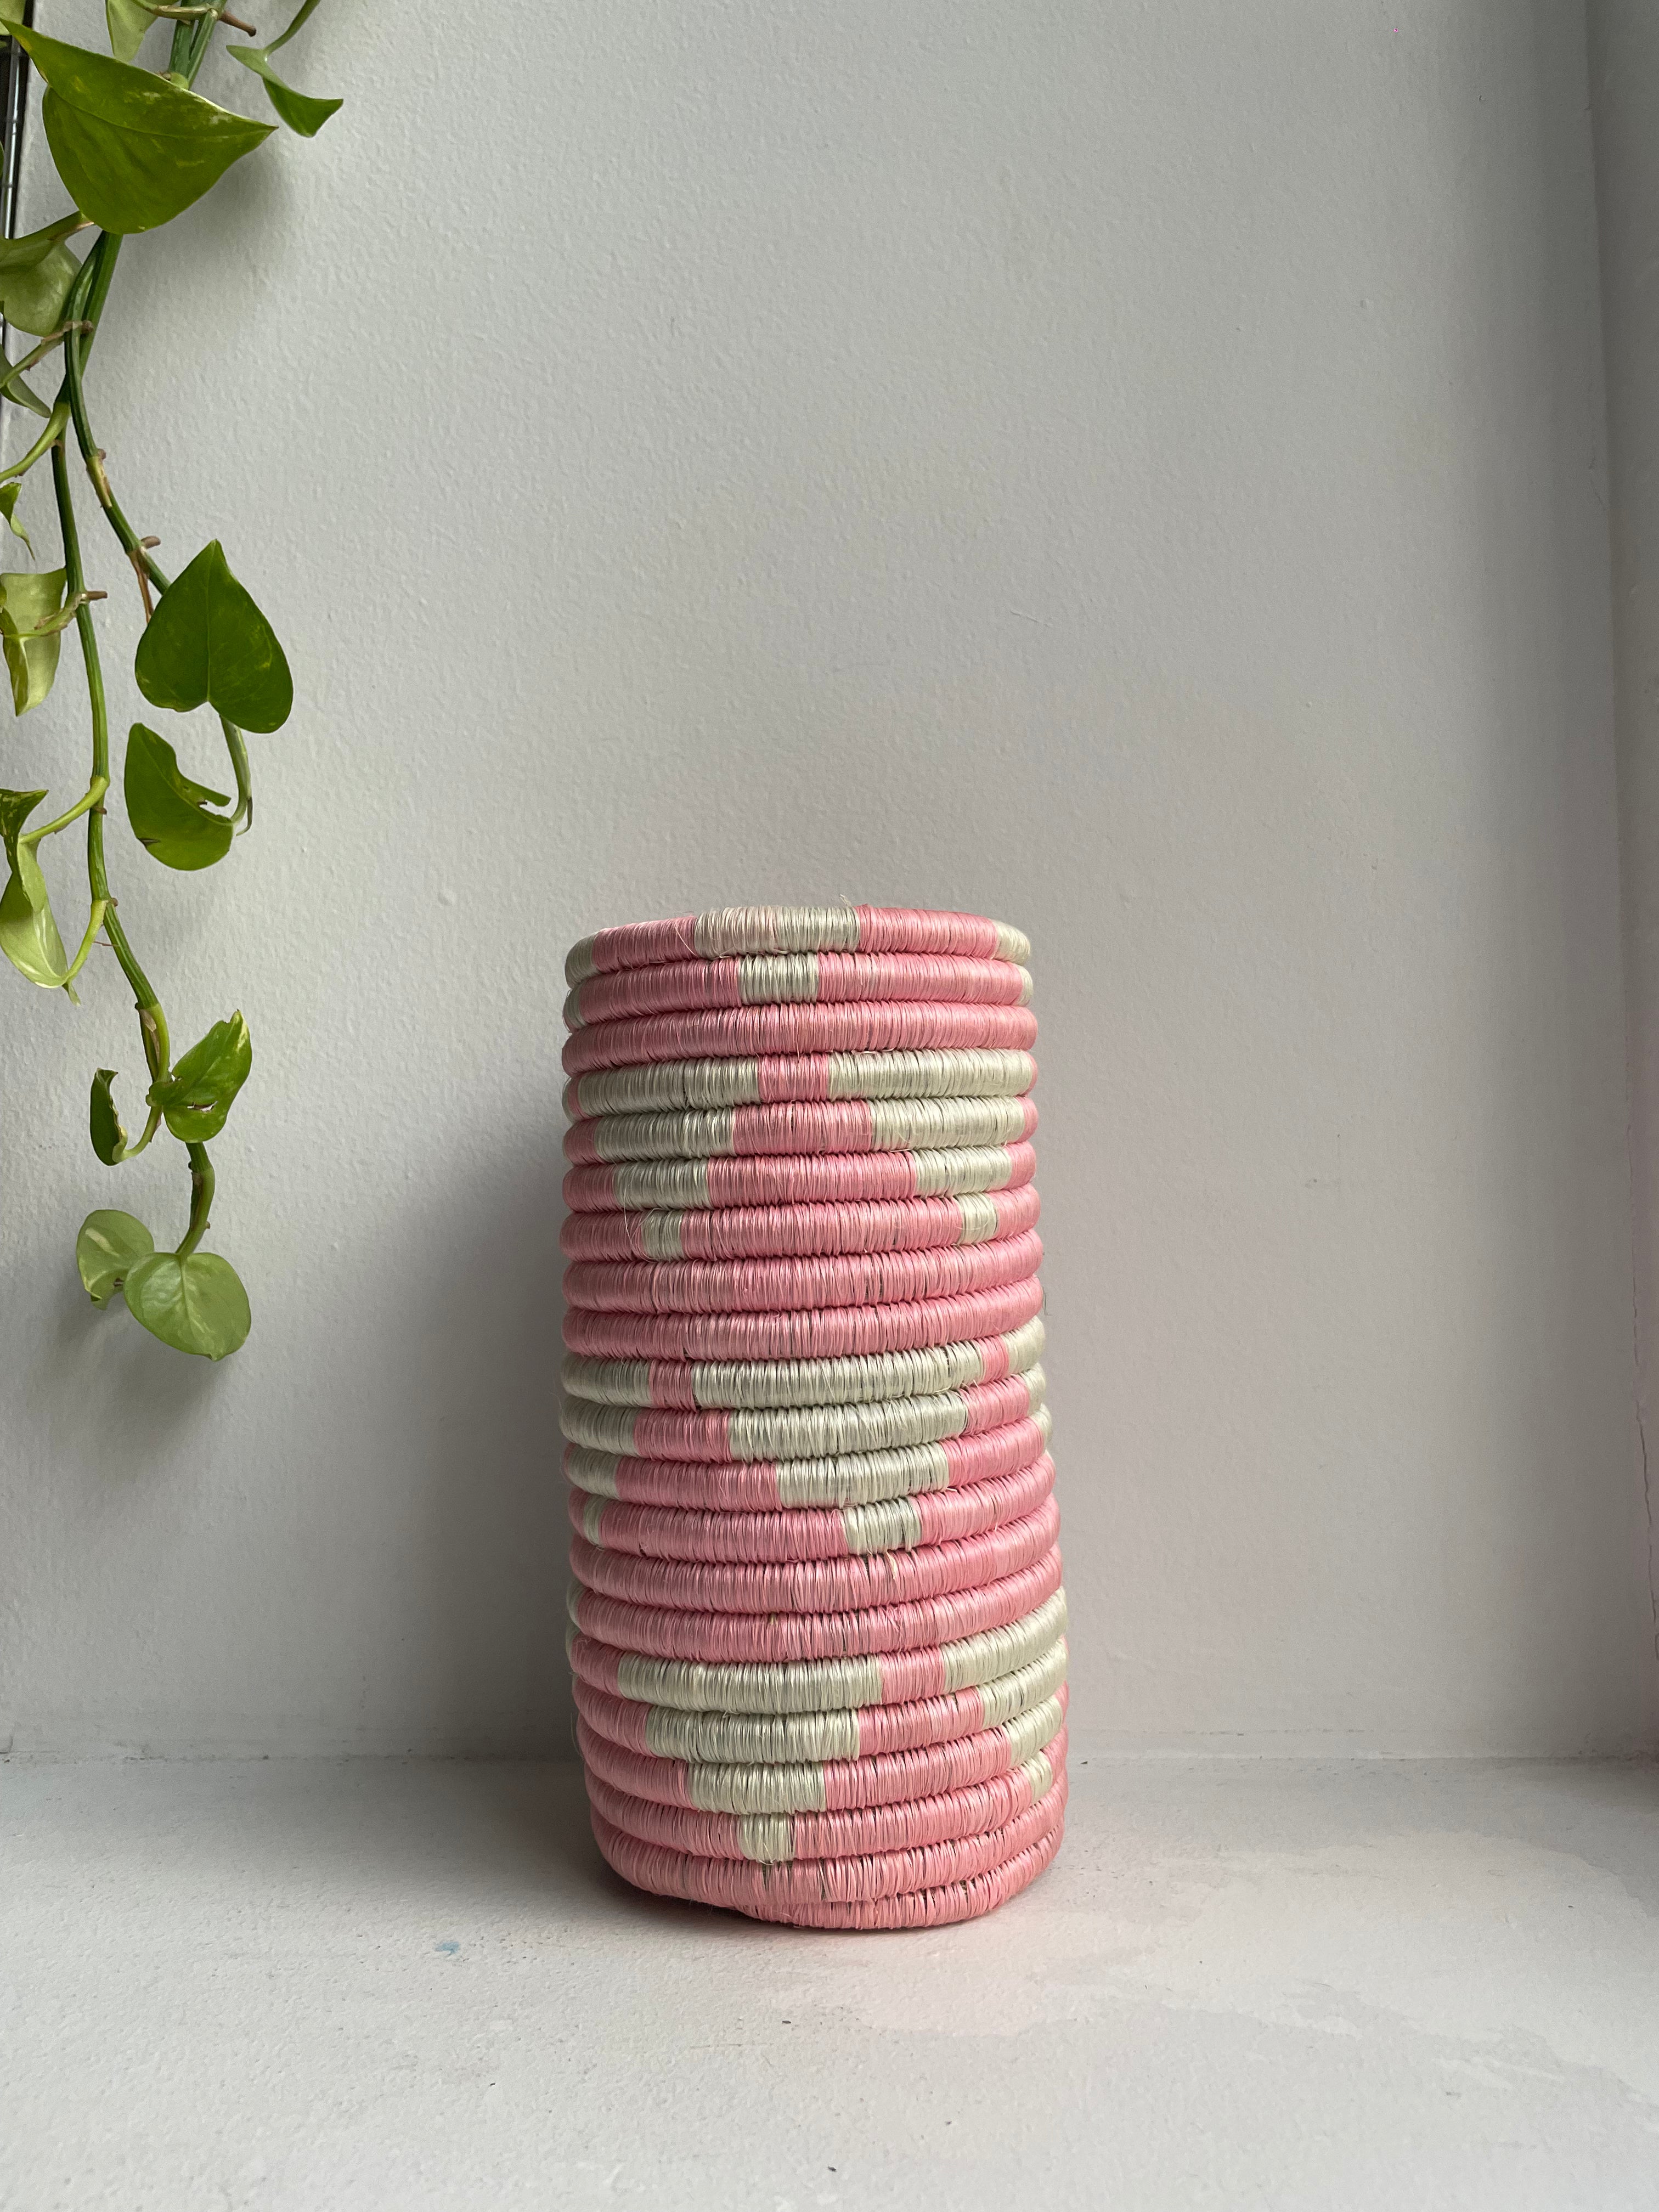 Display of bubble gum pink and white colored vase